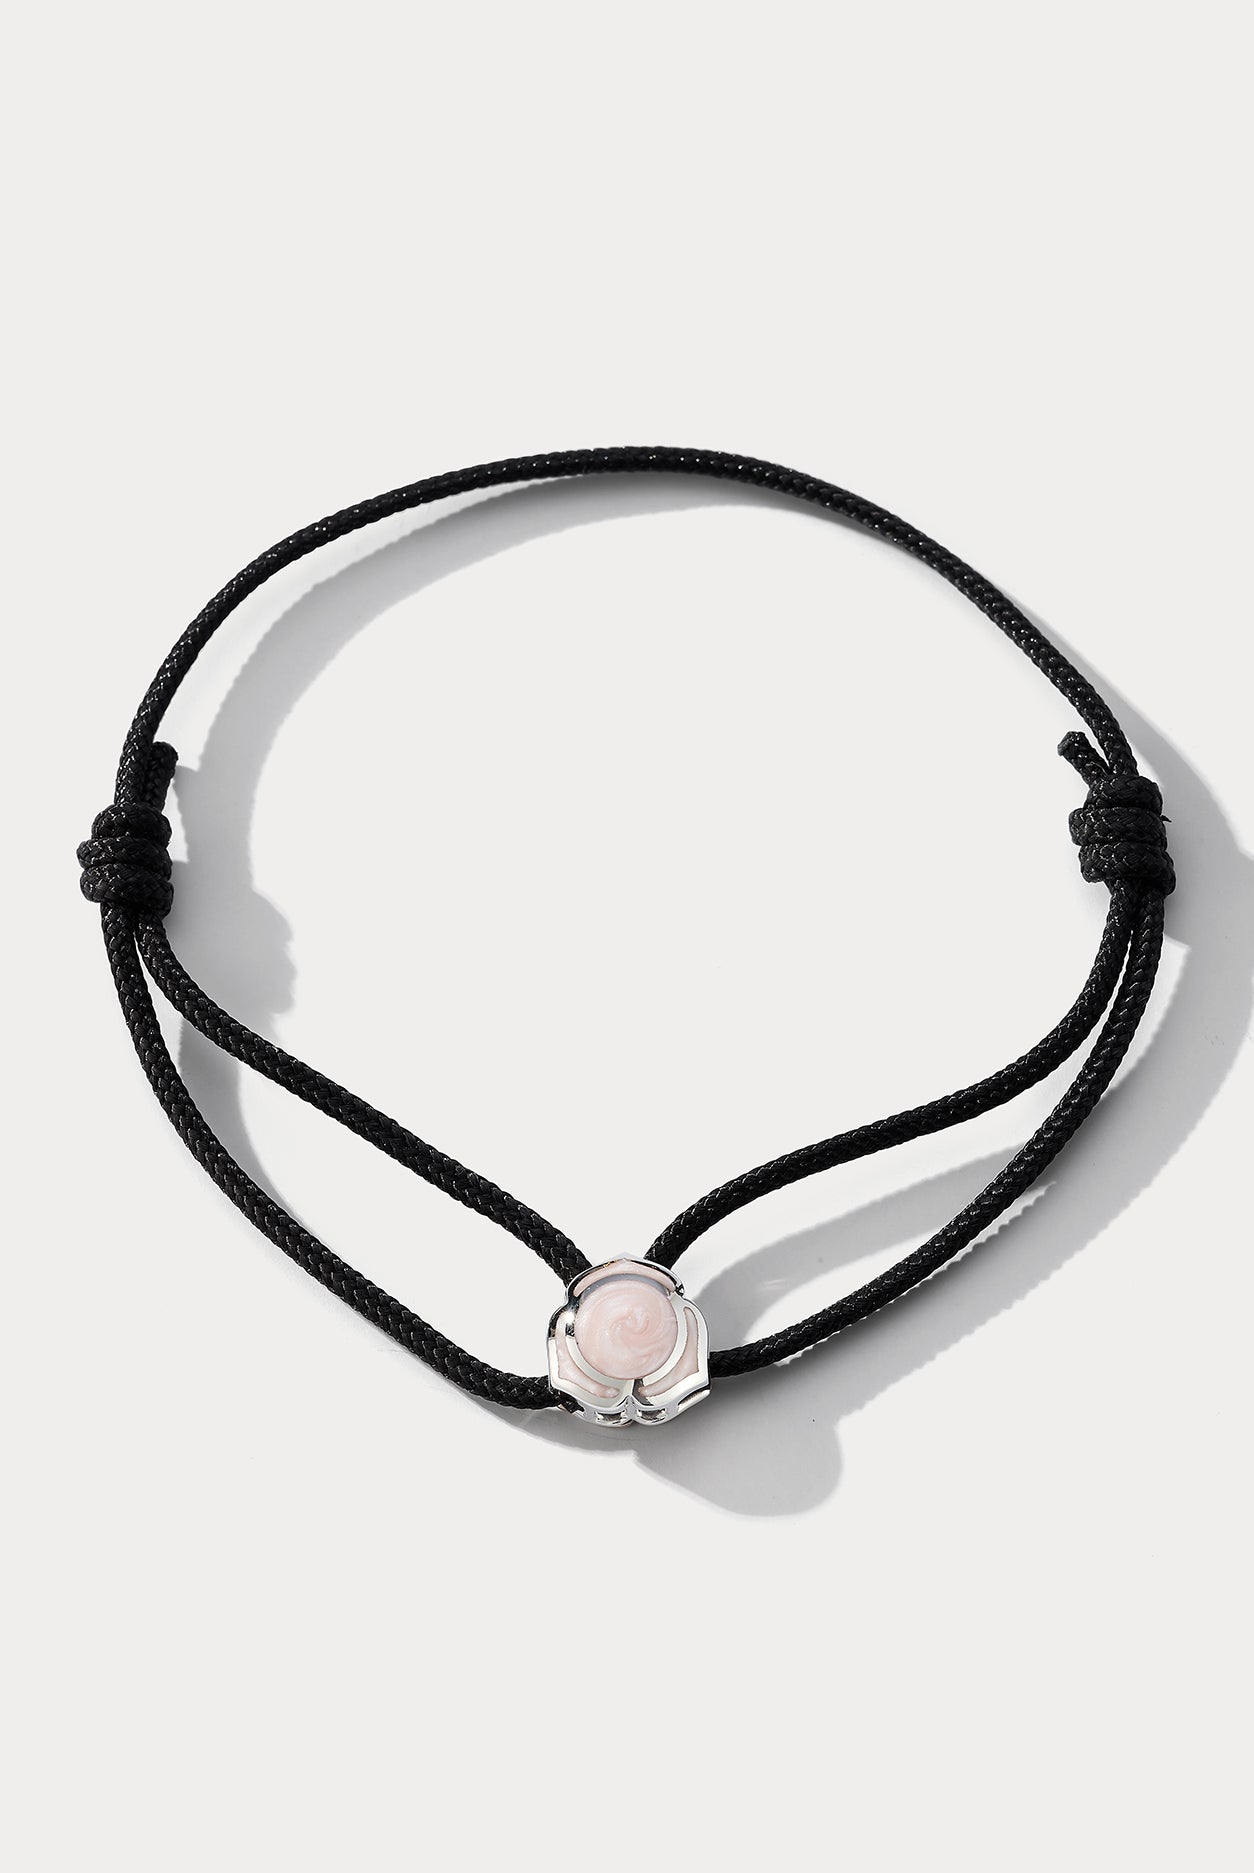 Heart Note White Gold and Pearl Pink Ceramic Bracelet - Ammrada